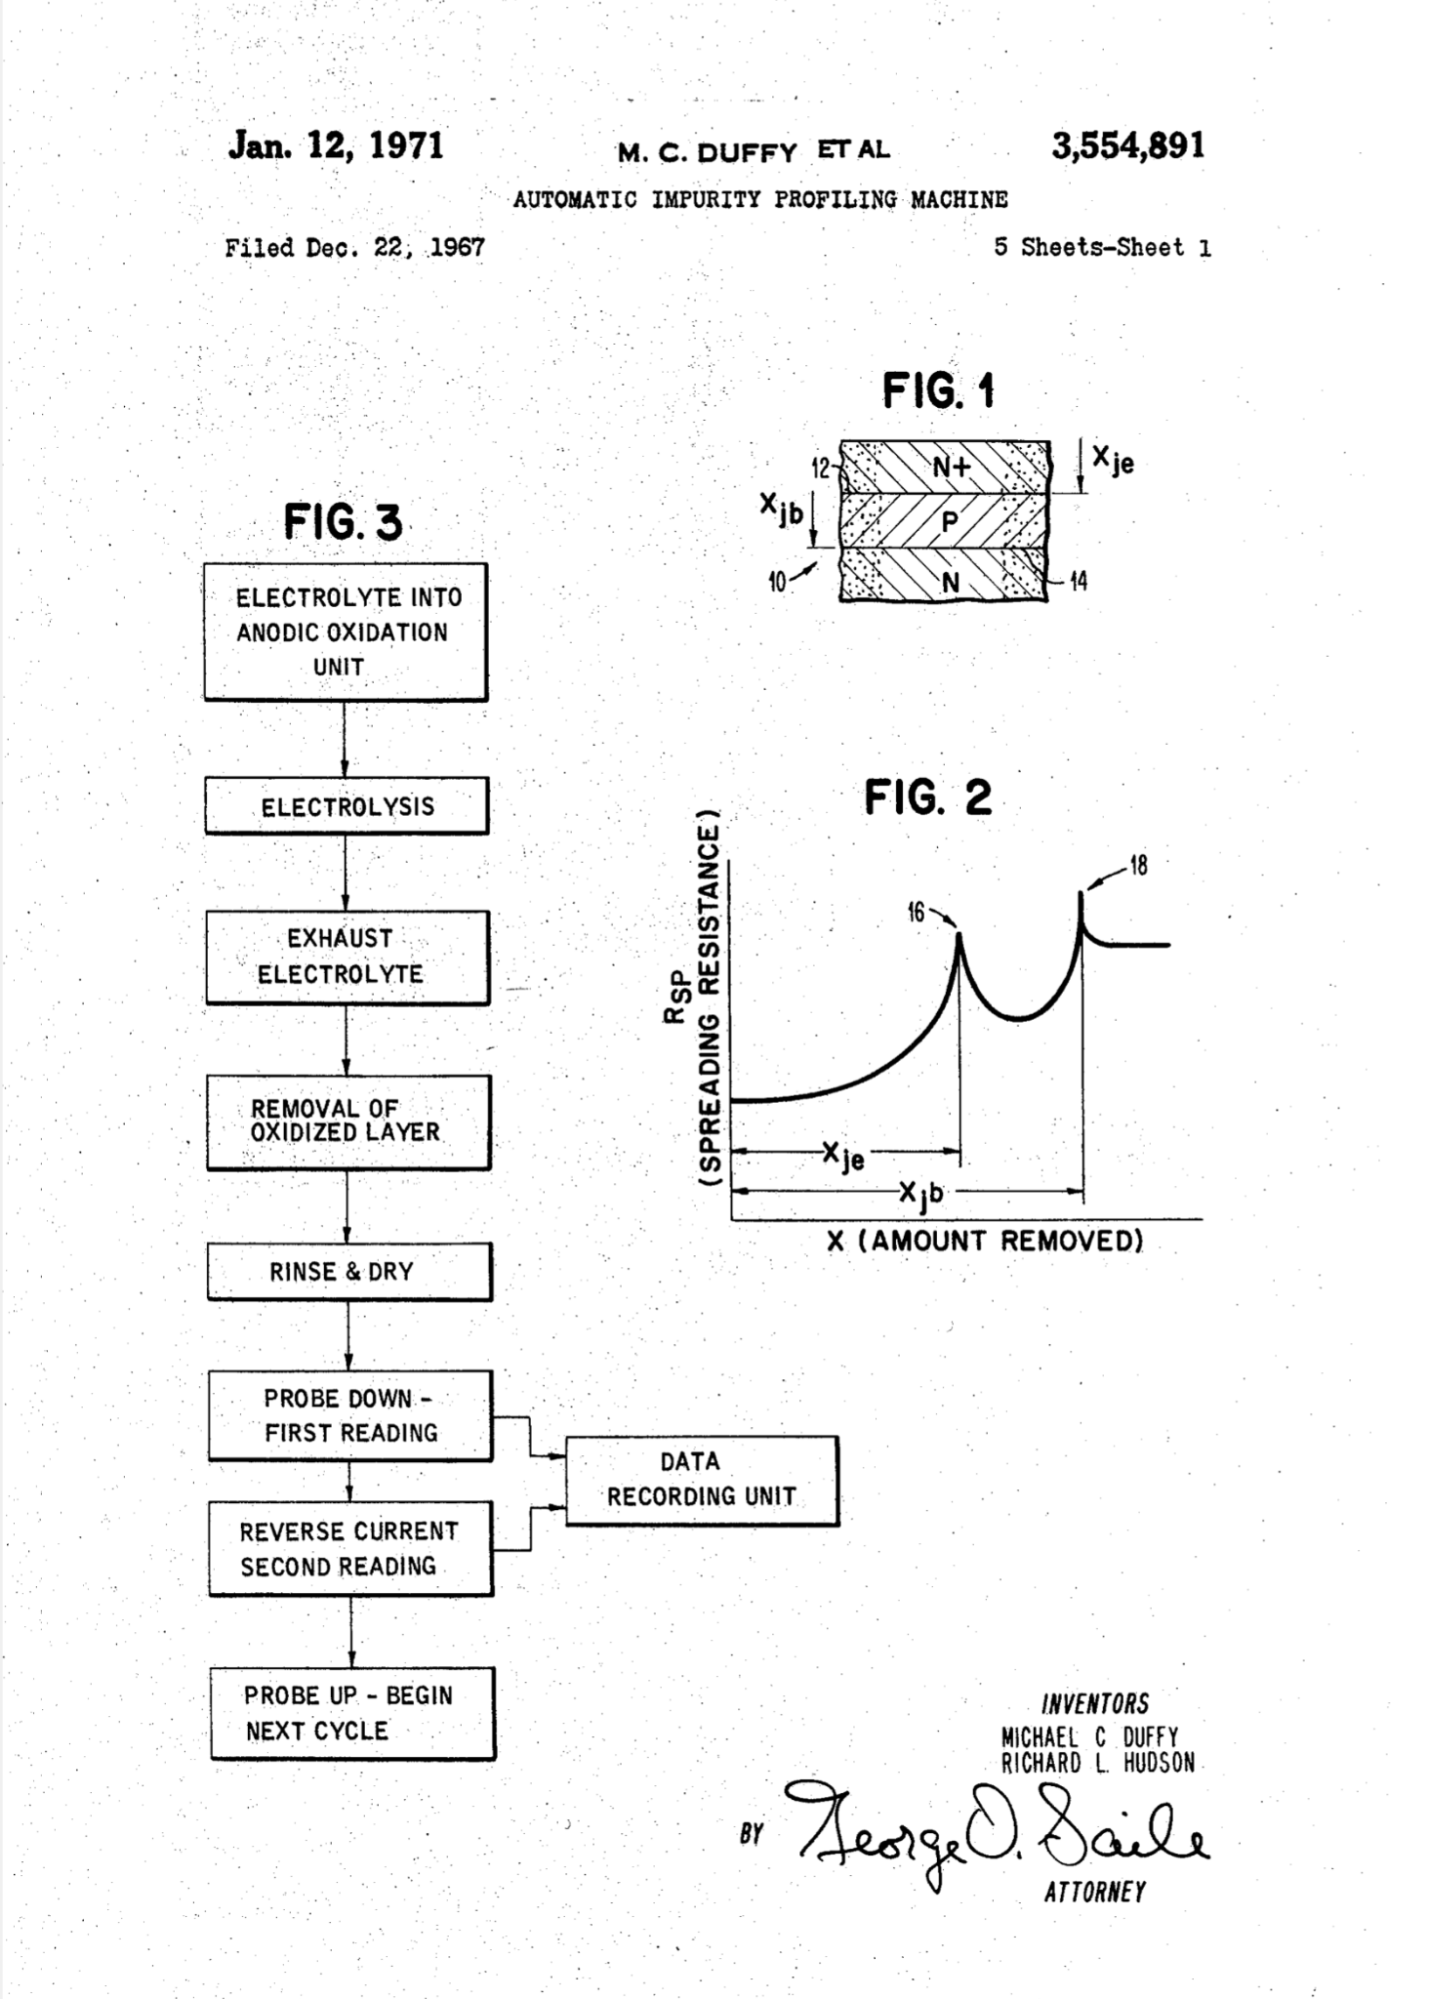 Scan of a page from the patent filing documents, featuring schematics